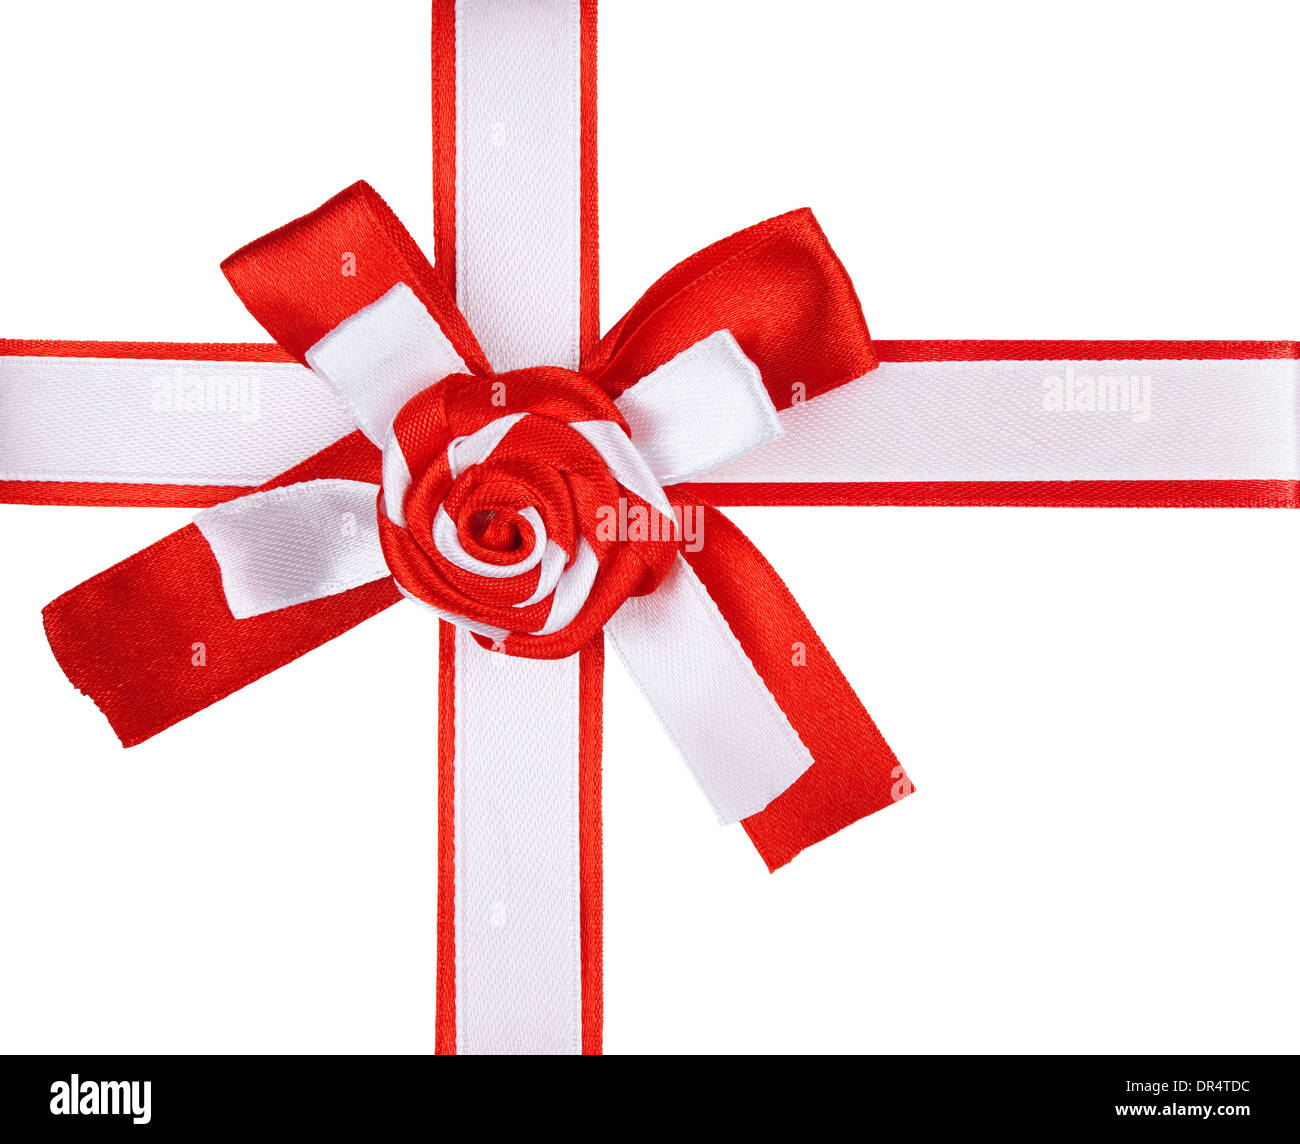 Red and white holiday ribbon bow isolated on white background Stock Photo